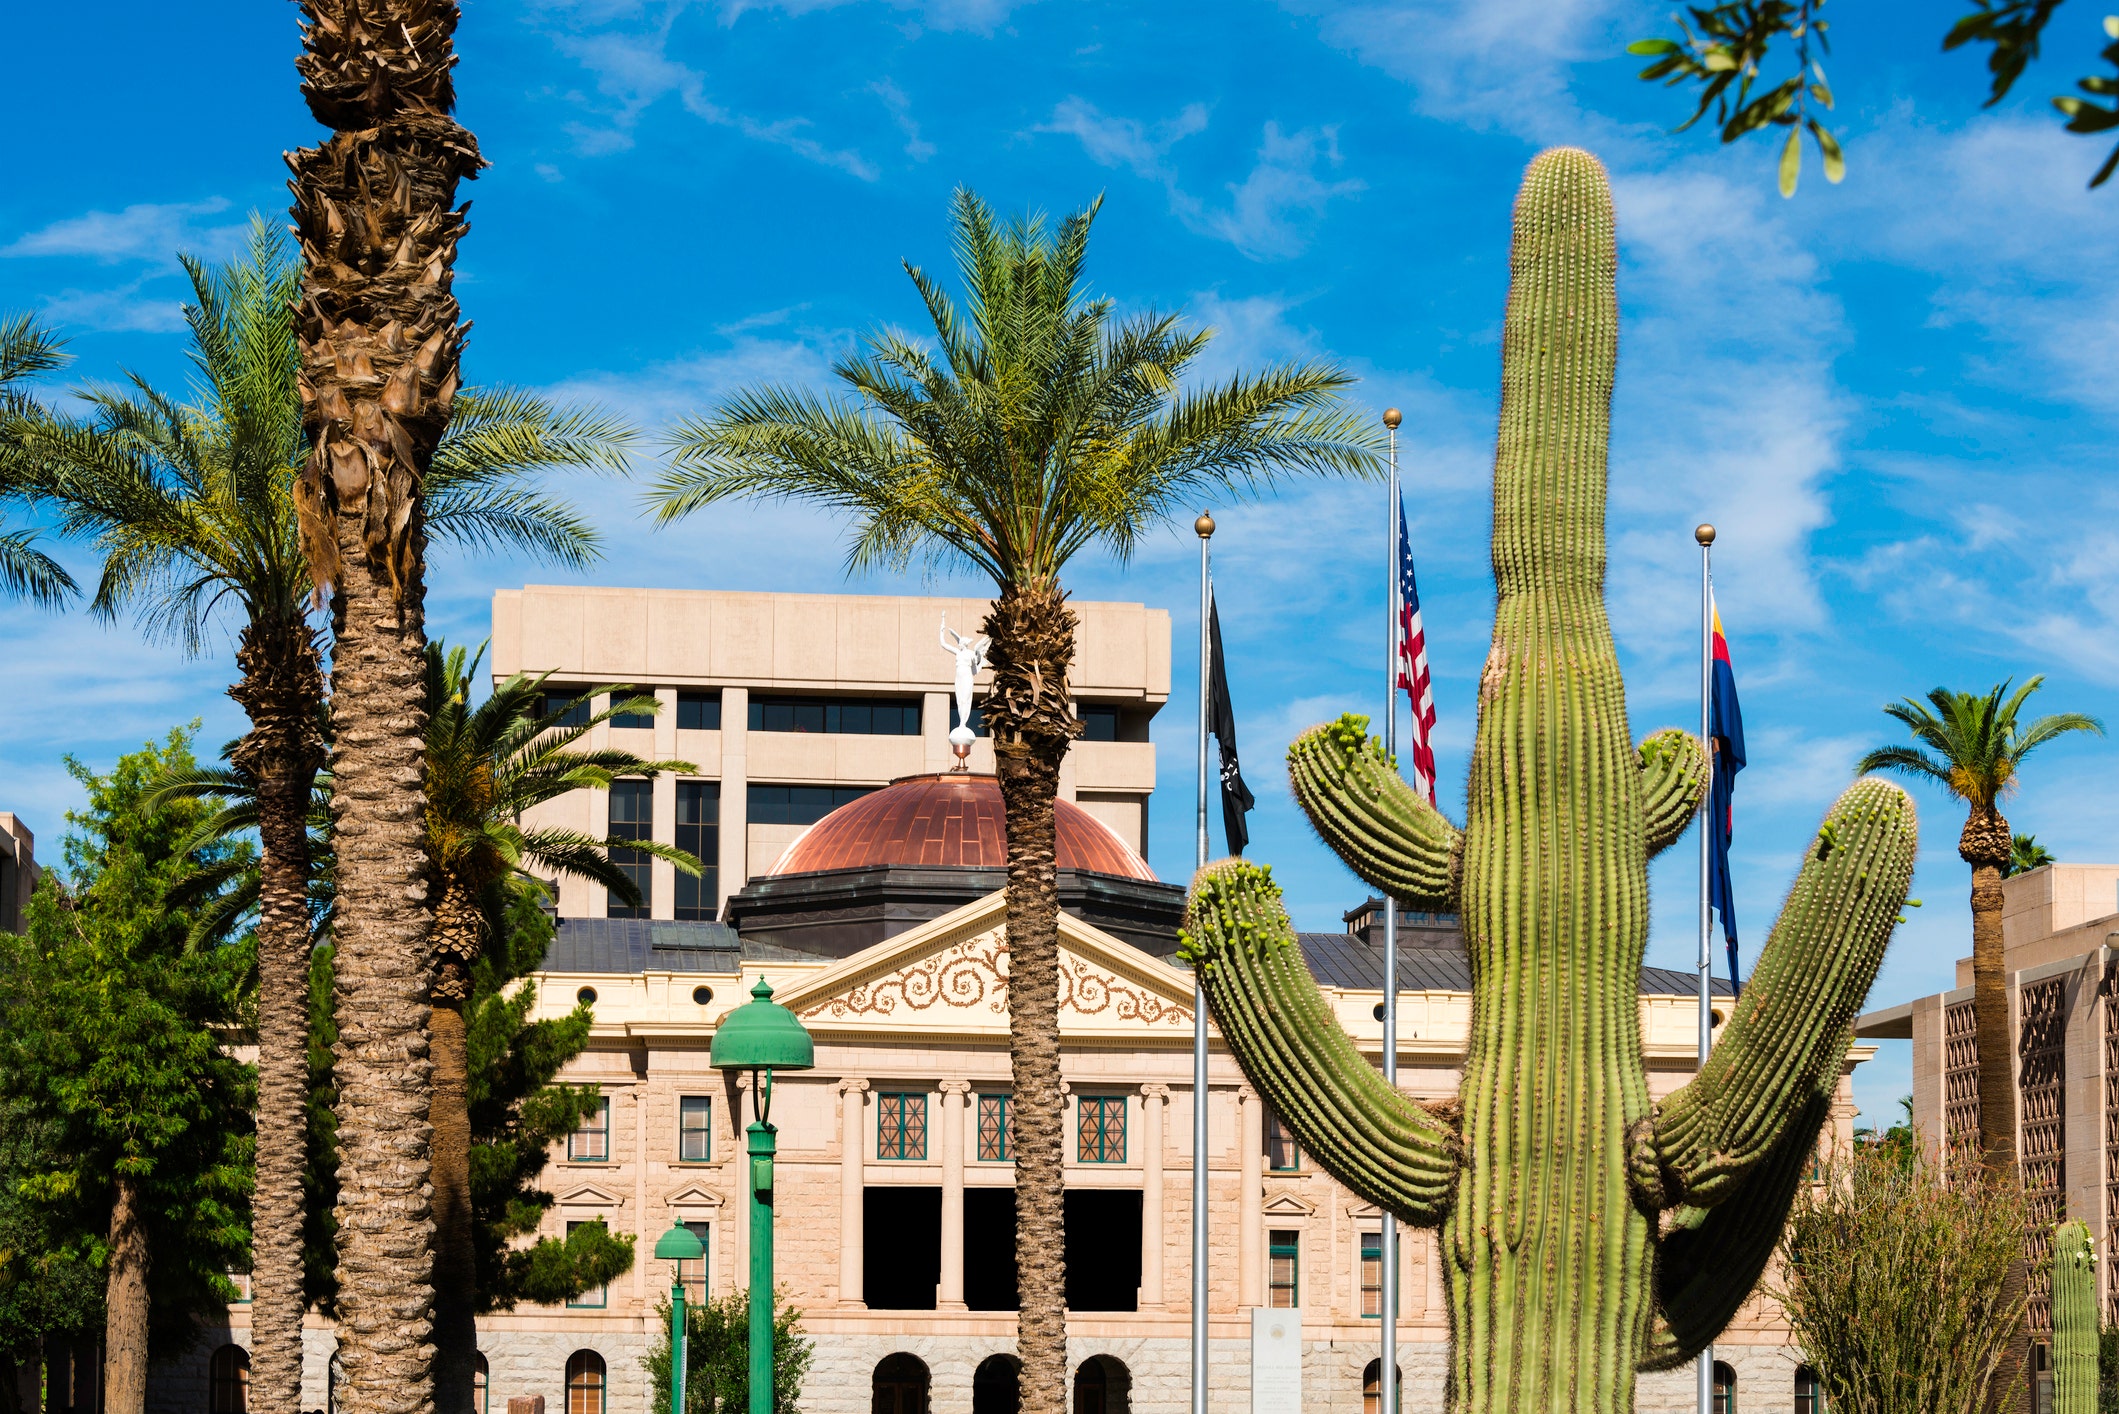 News :Second body found on Arizona Capitol grounds in under 2 weeks